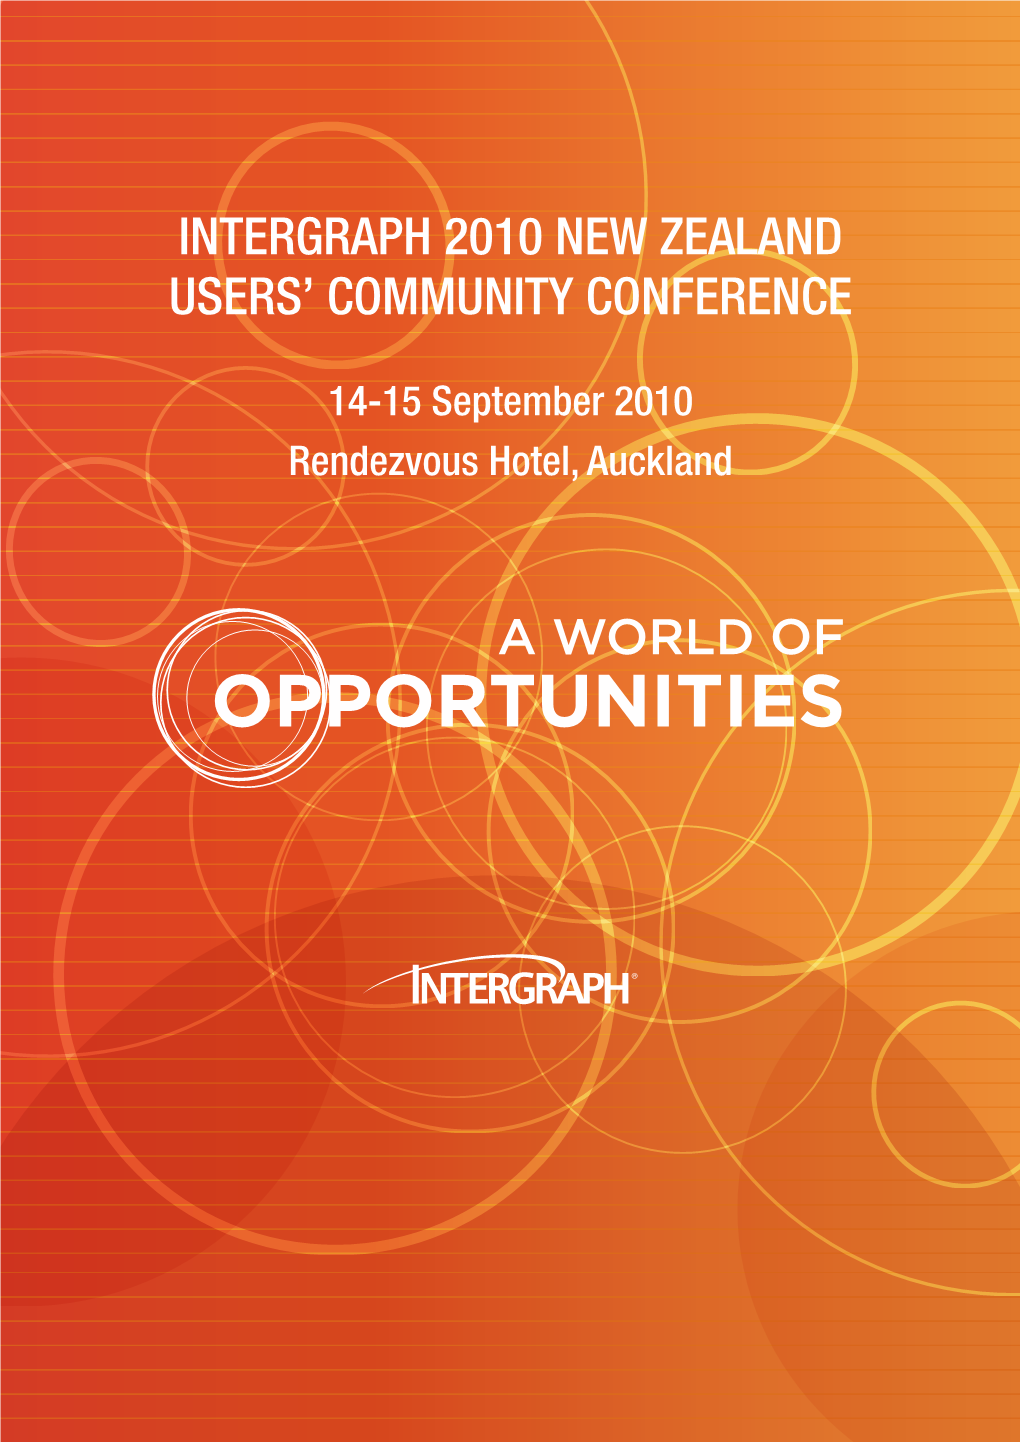 OPPORTUNITIES Intergraph 2010 NEW ZEALAND 14 - 15 SEPTEMBER USERS’ COMMUNITY CONFERENCE